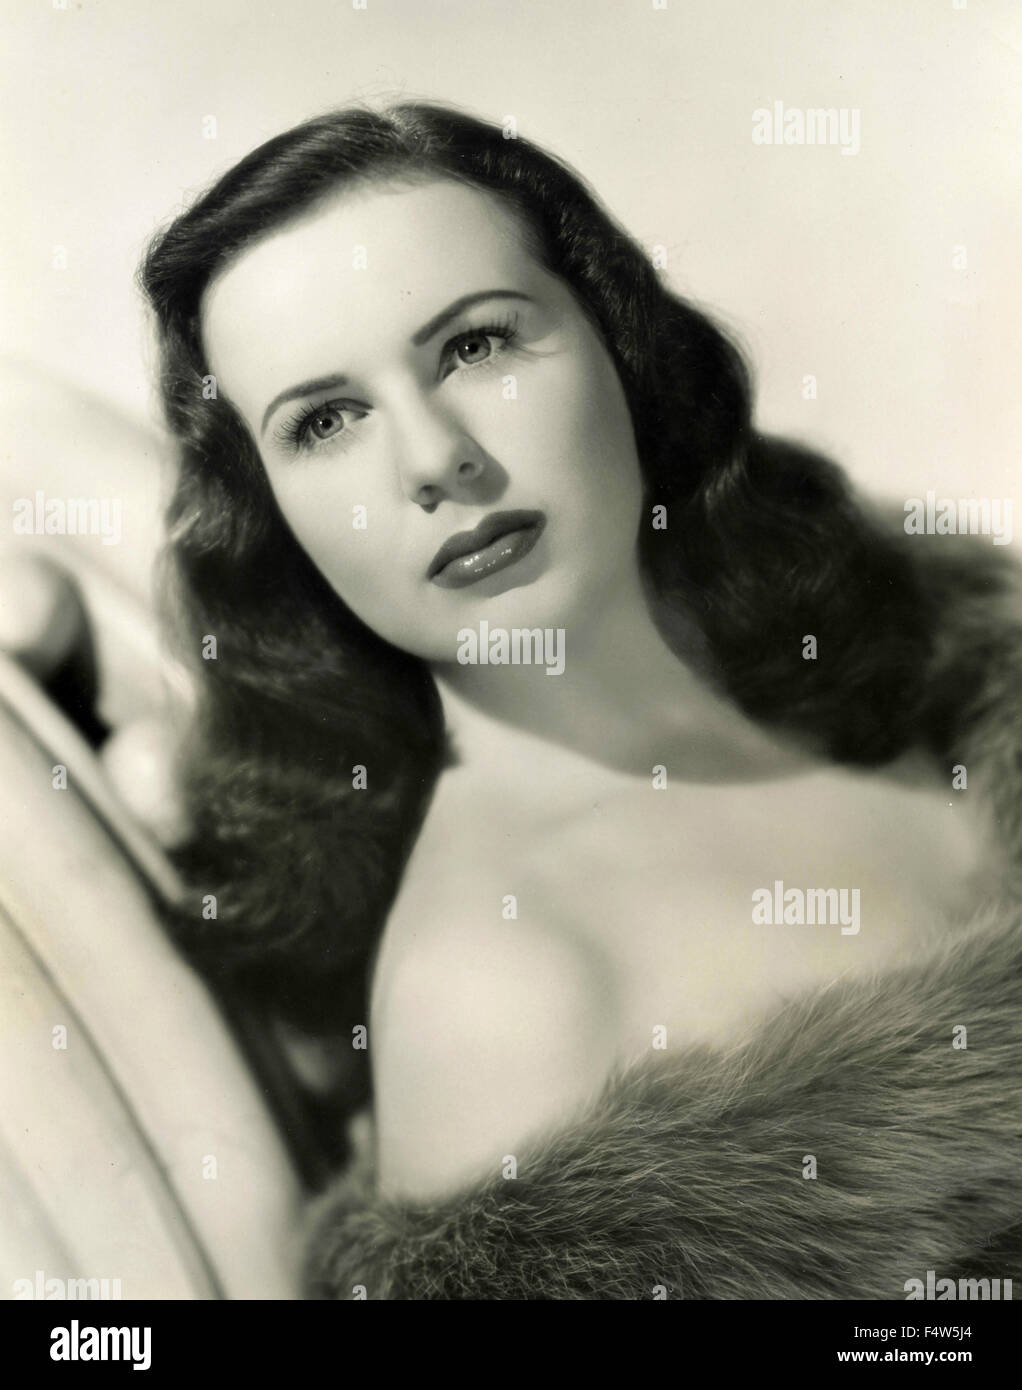 The Canadian actress and singer Deanna Durbin Stock Photo